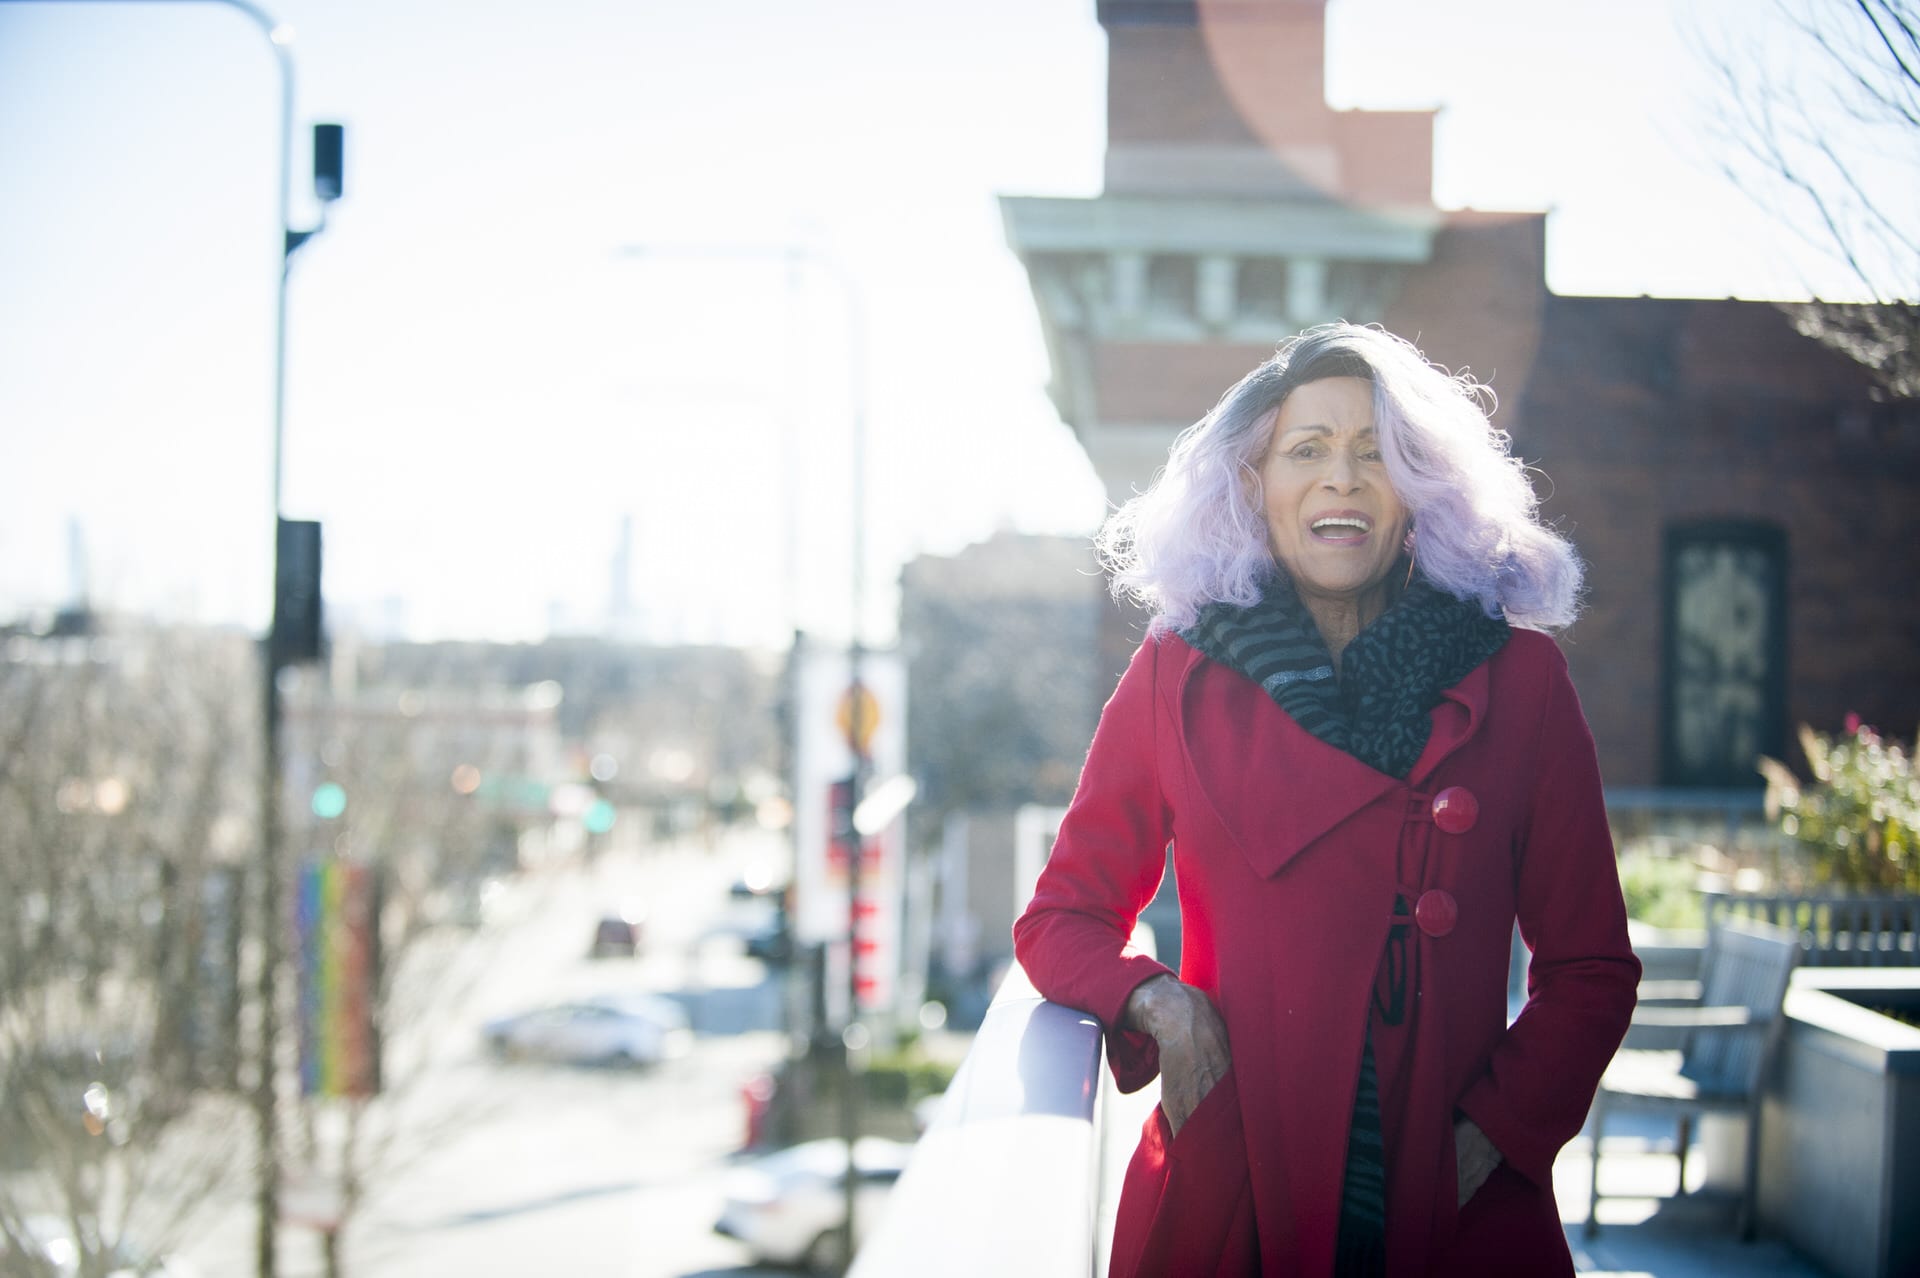 Gloria Allen stands on the terrace of her apartment building in a red coat.